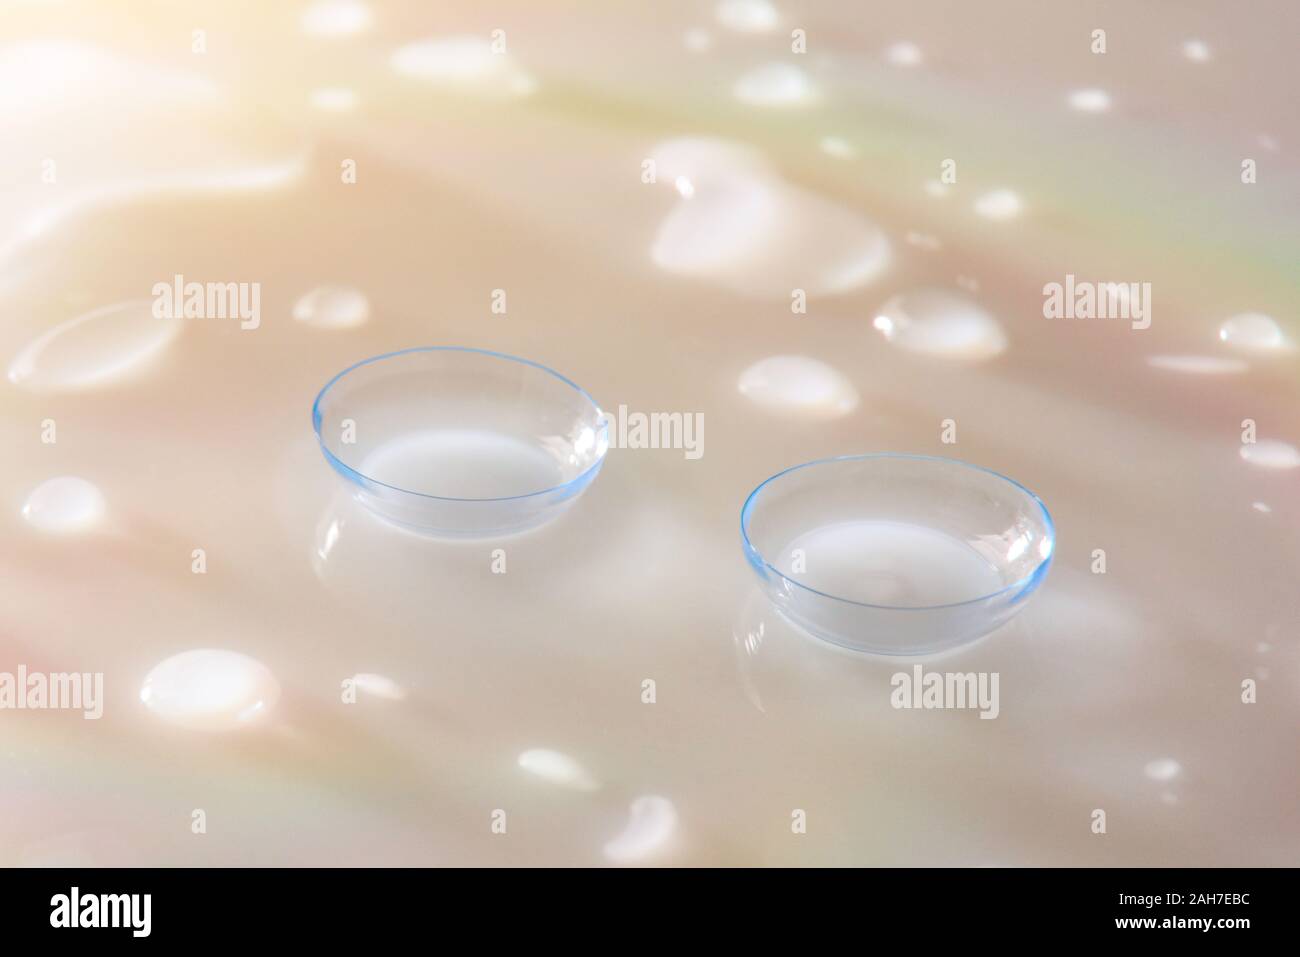 Contact lenses on white glass reflective table with water drops and color reflections. Horizontal composition. Elevated view. Stock Photo